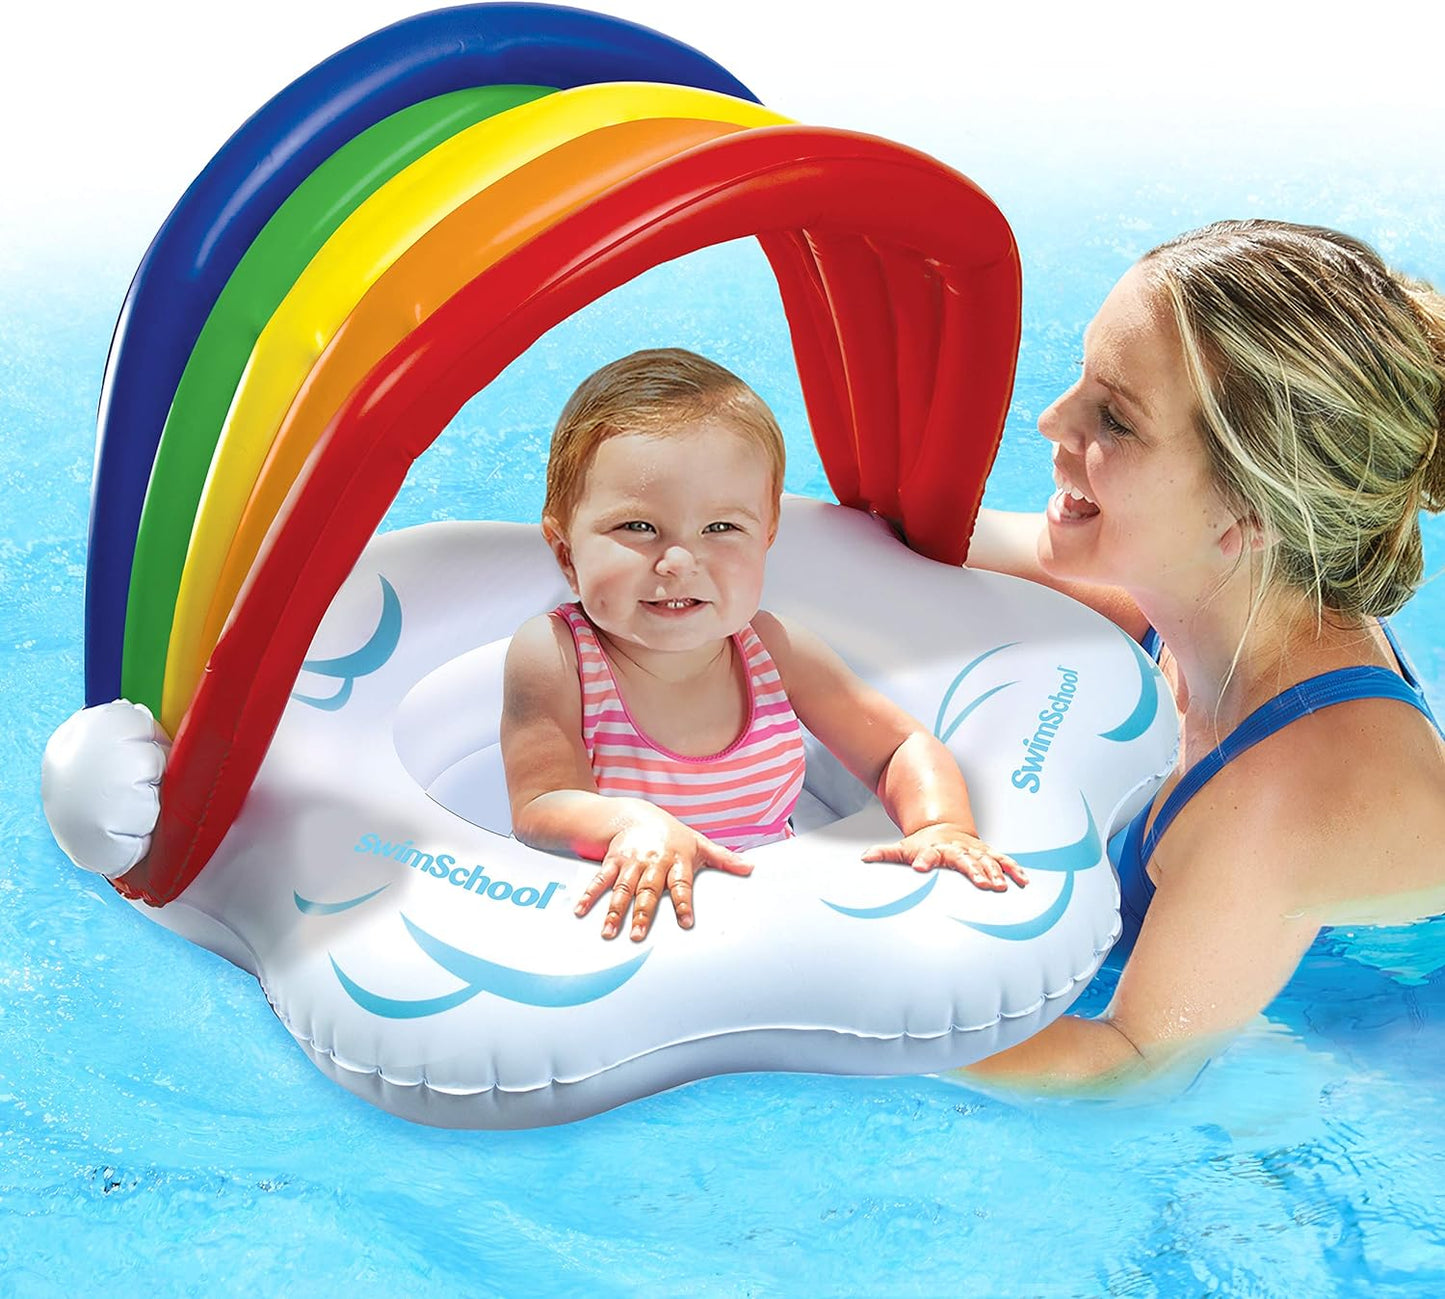 SwimSchool Infant Baby Pool Floats, Free Swimming, Super Buoyant – Ages 6-24 Months – Multiple Colors/Styles – Adjustable Canopies and Seats, Splash & Play Baby Floaties